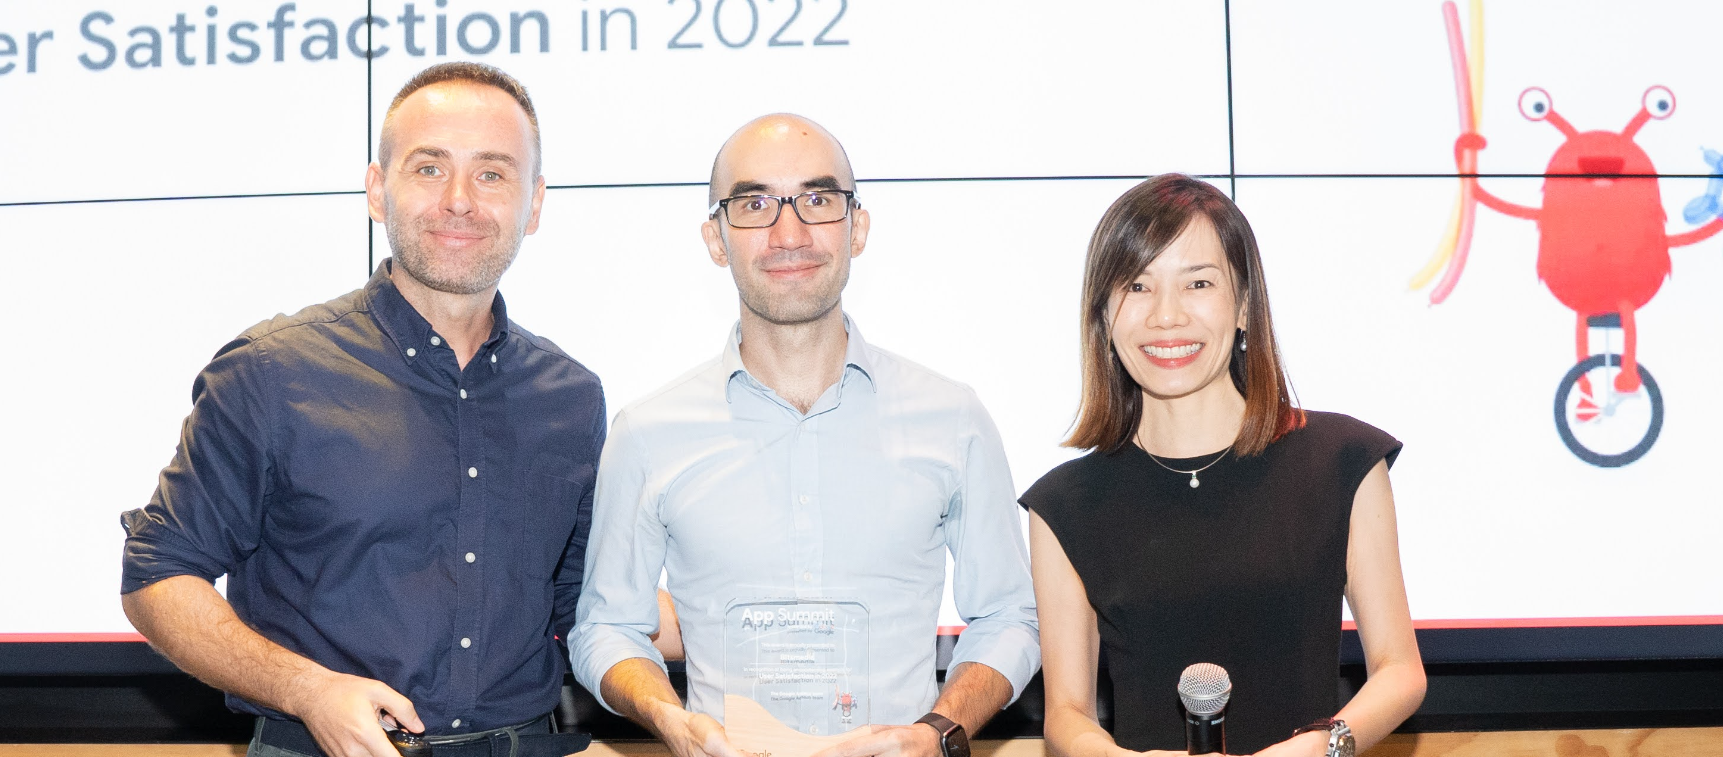 Muslim Pro App receives the User Satisfaction Award at the recent Google APAC App Summit